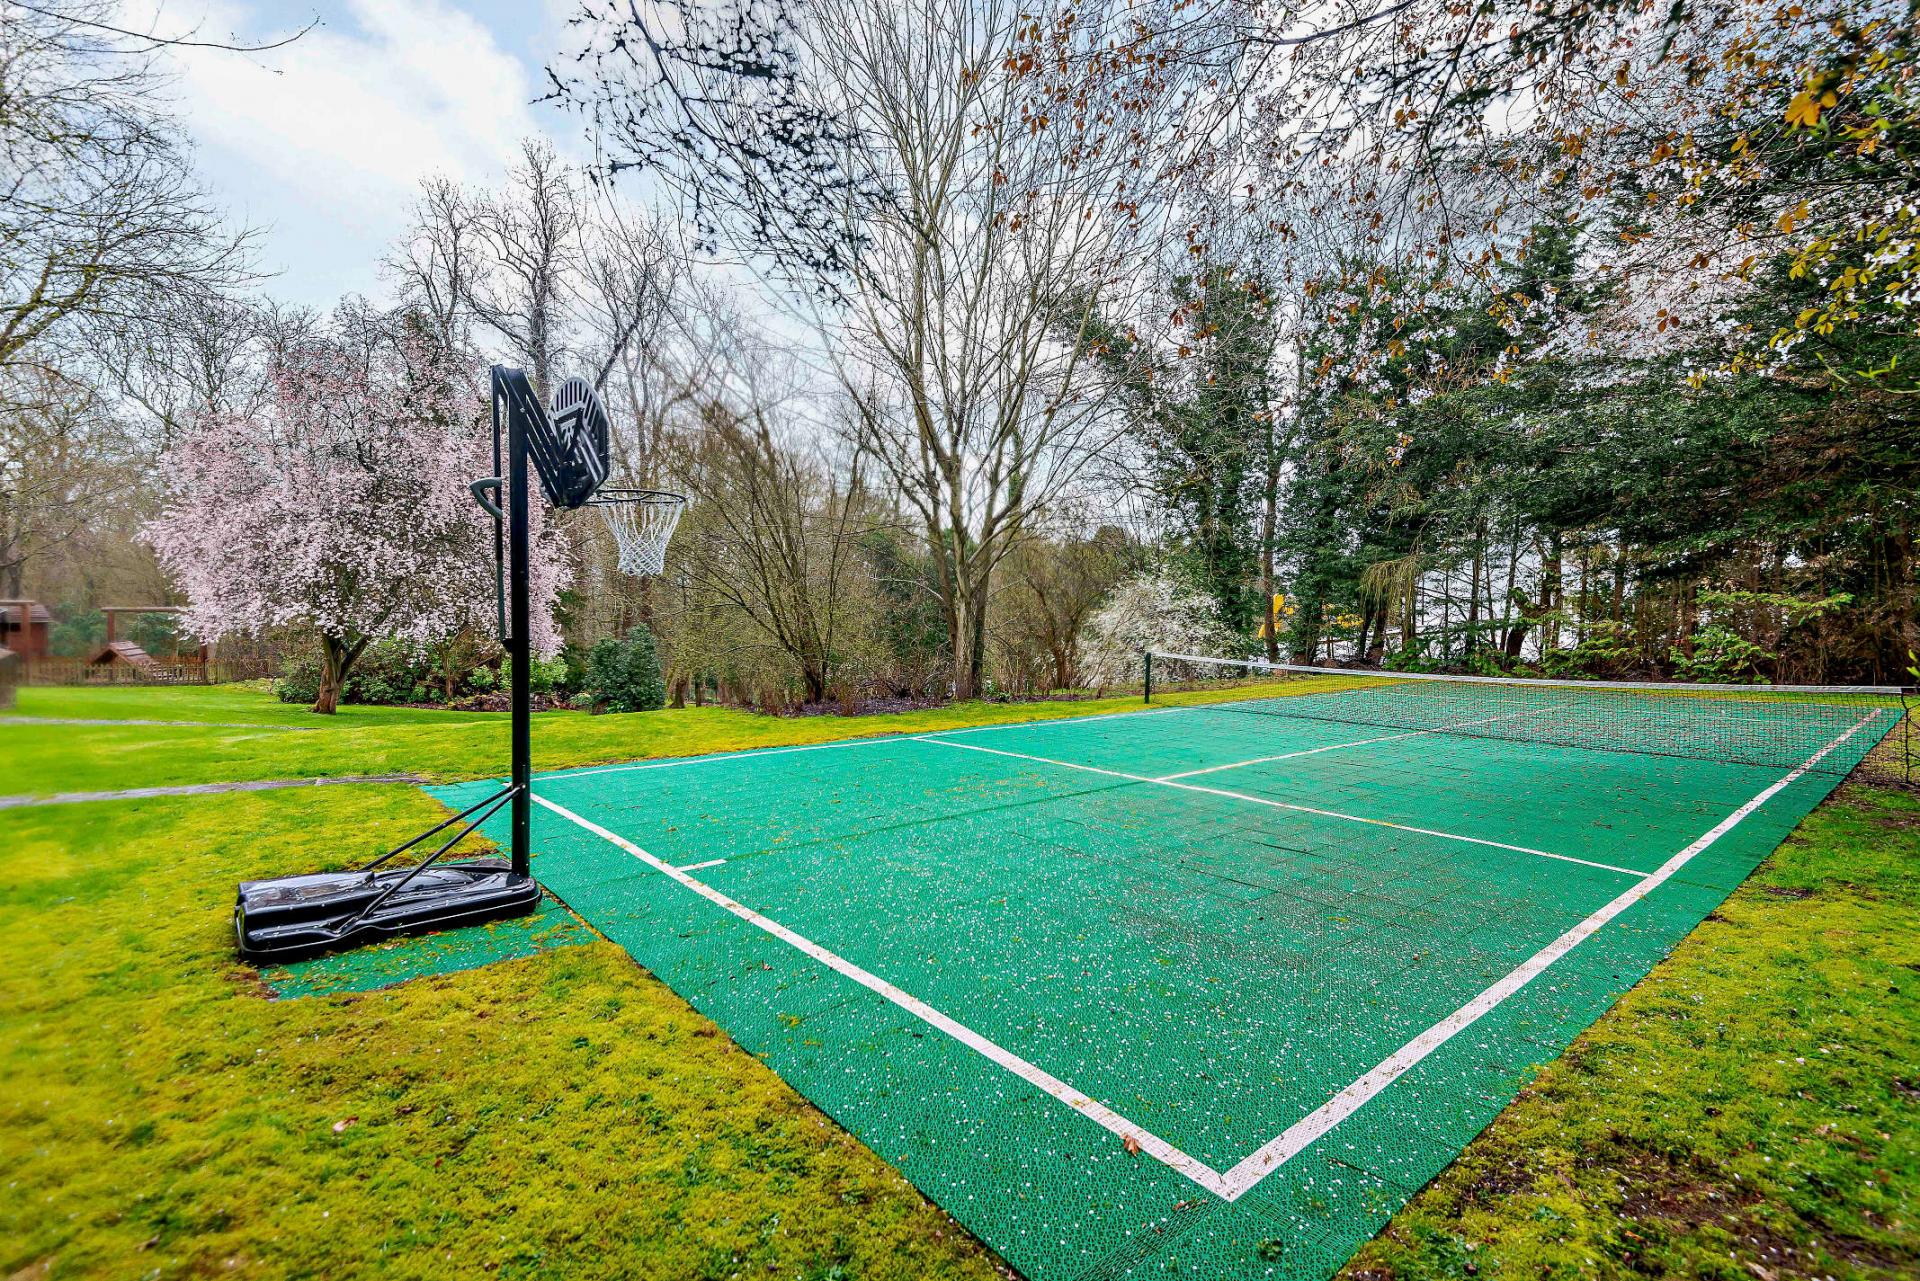 5 Bedroom Detached House For Sale in The Ridgeway, Cuffley Tennis COurt